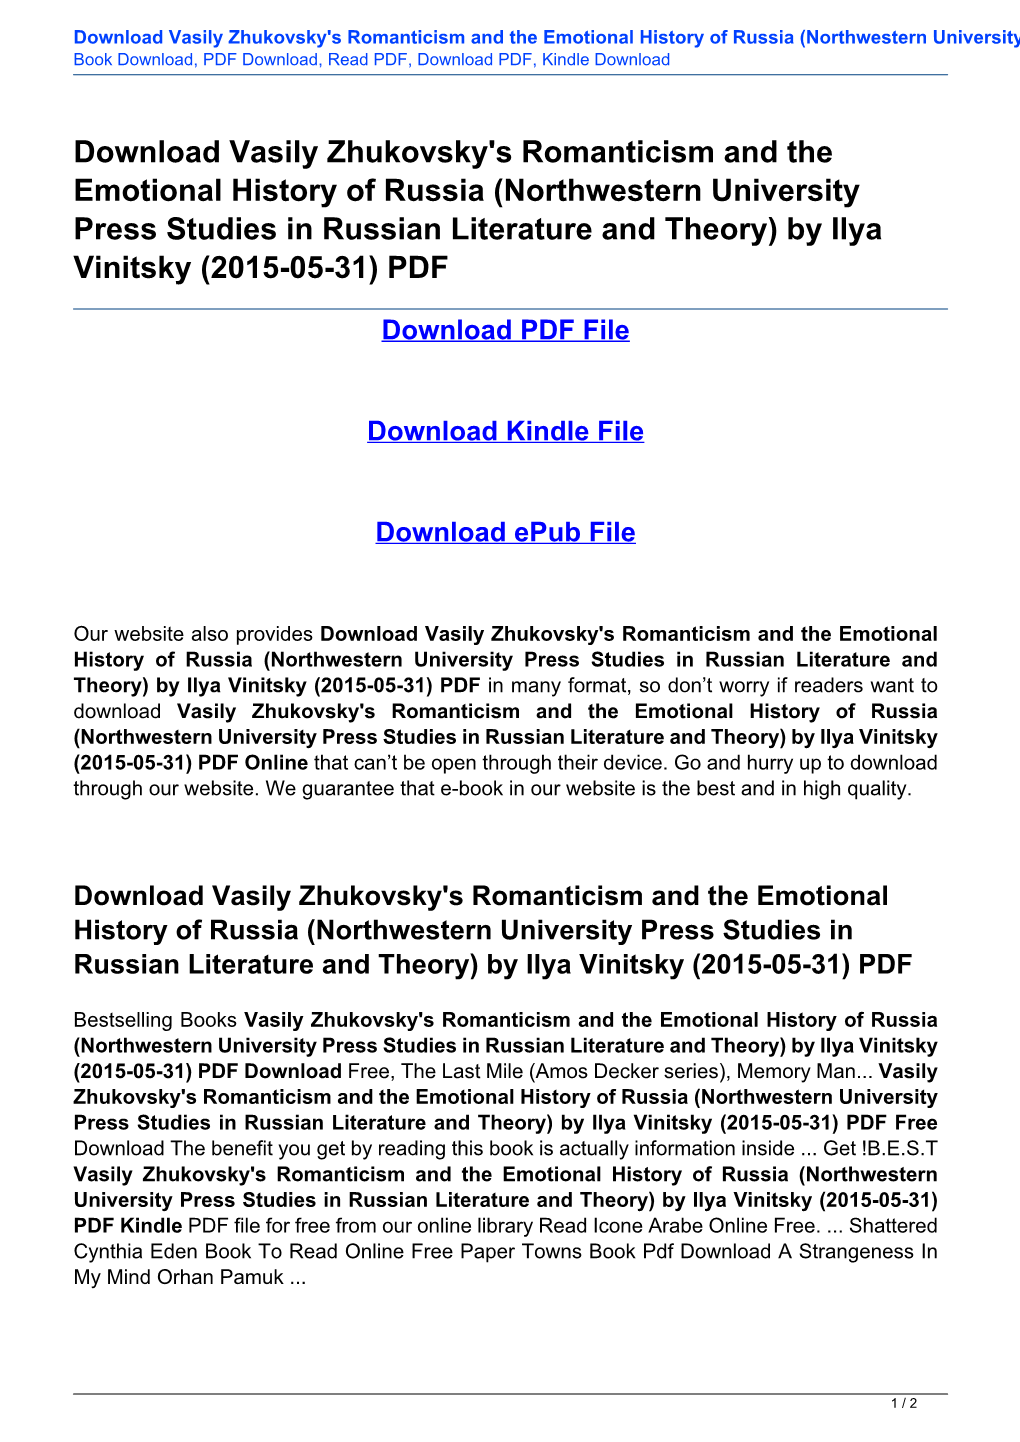 Download Vasily Zhukovsky's Romanticism and the Emotional